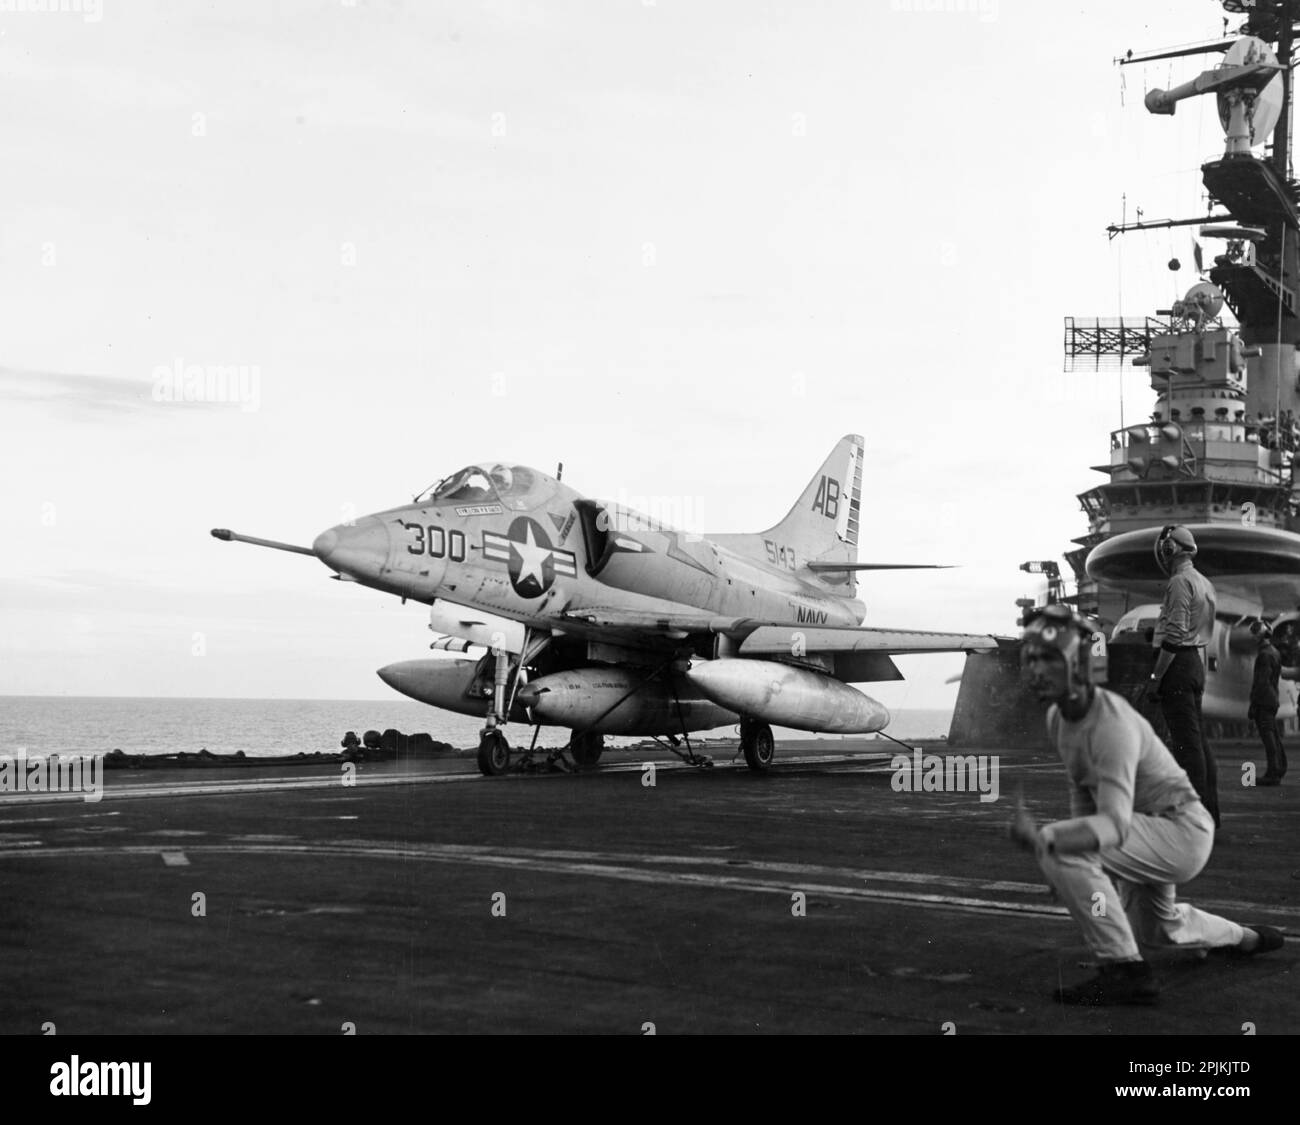 A U.S. Navy Douglas A-4C Skyhawk (BuNo 145143) from Attack Squadron 172 (VA-172) 'Blue Bolts' prepares to leave the flight deck of the aircraft carrier USS Franklin D. Roosevelt (CVA-42), 10 August 1966. VA-172 was assigned to Attack Carrier Air Wing 1 (CVW-1) aboard the Franklin D. Roosevelt for a deployment to Vietnam from 21 June 1966 to 21 February 1967. This aircraft was lost on 2 December 1966, when it was shot down by a North Vietnamese SA-2 missile during a night reconnaissance mission over the Red River delta, south of Hanoi, Vietnam. The pilot, Commander Bruce A. Nystrom, VA-172's co Stock Photo